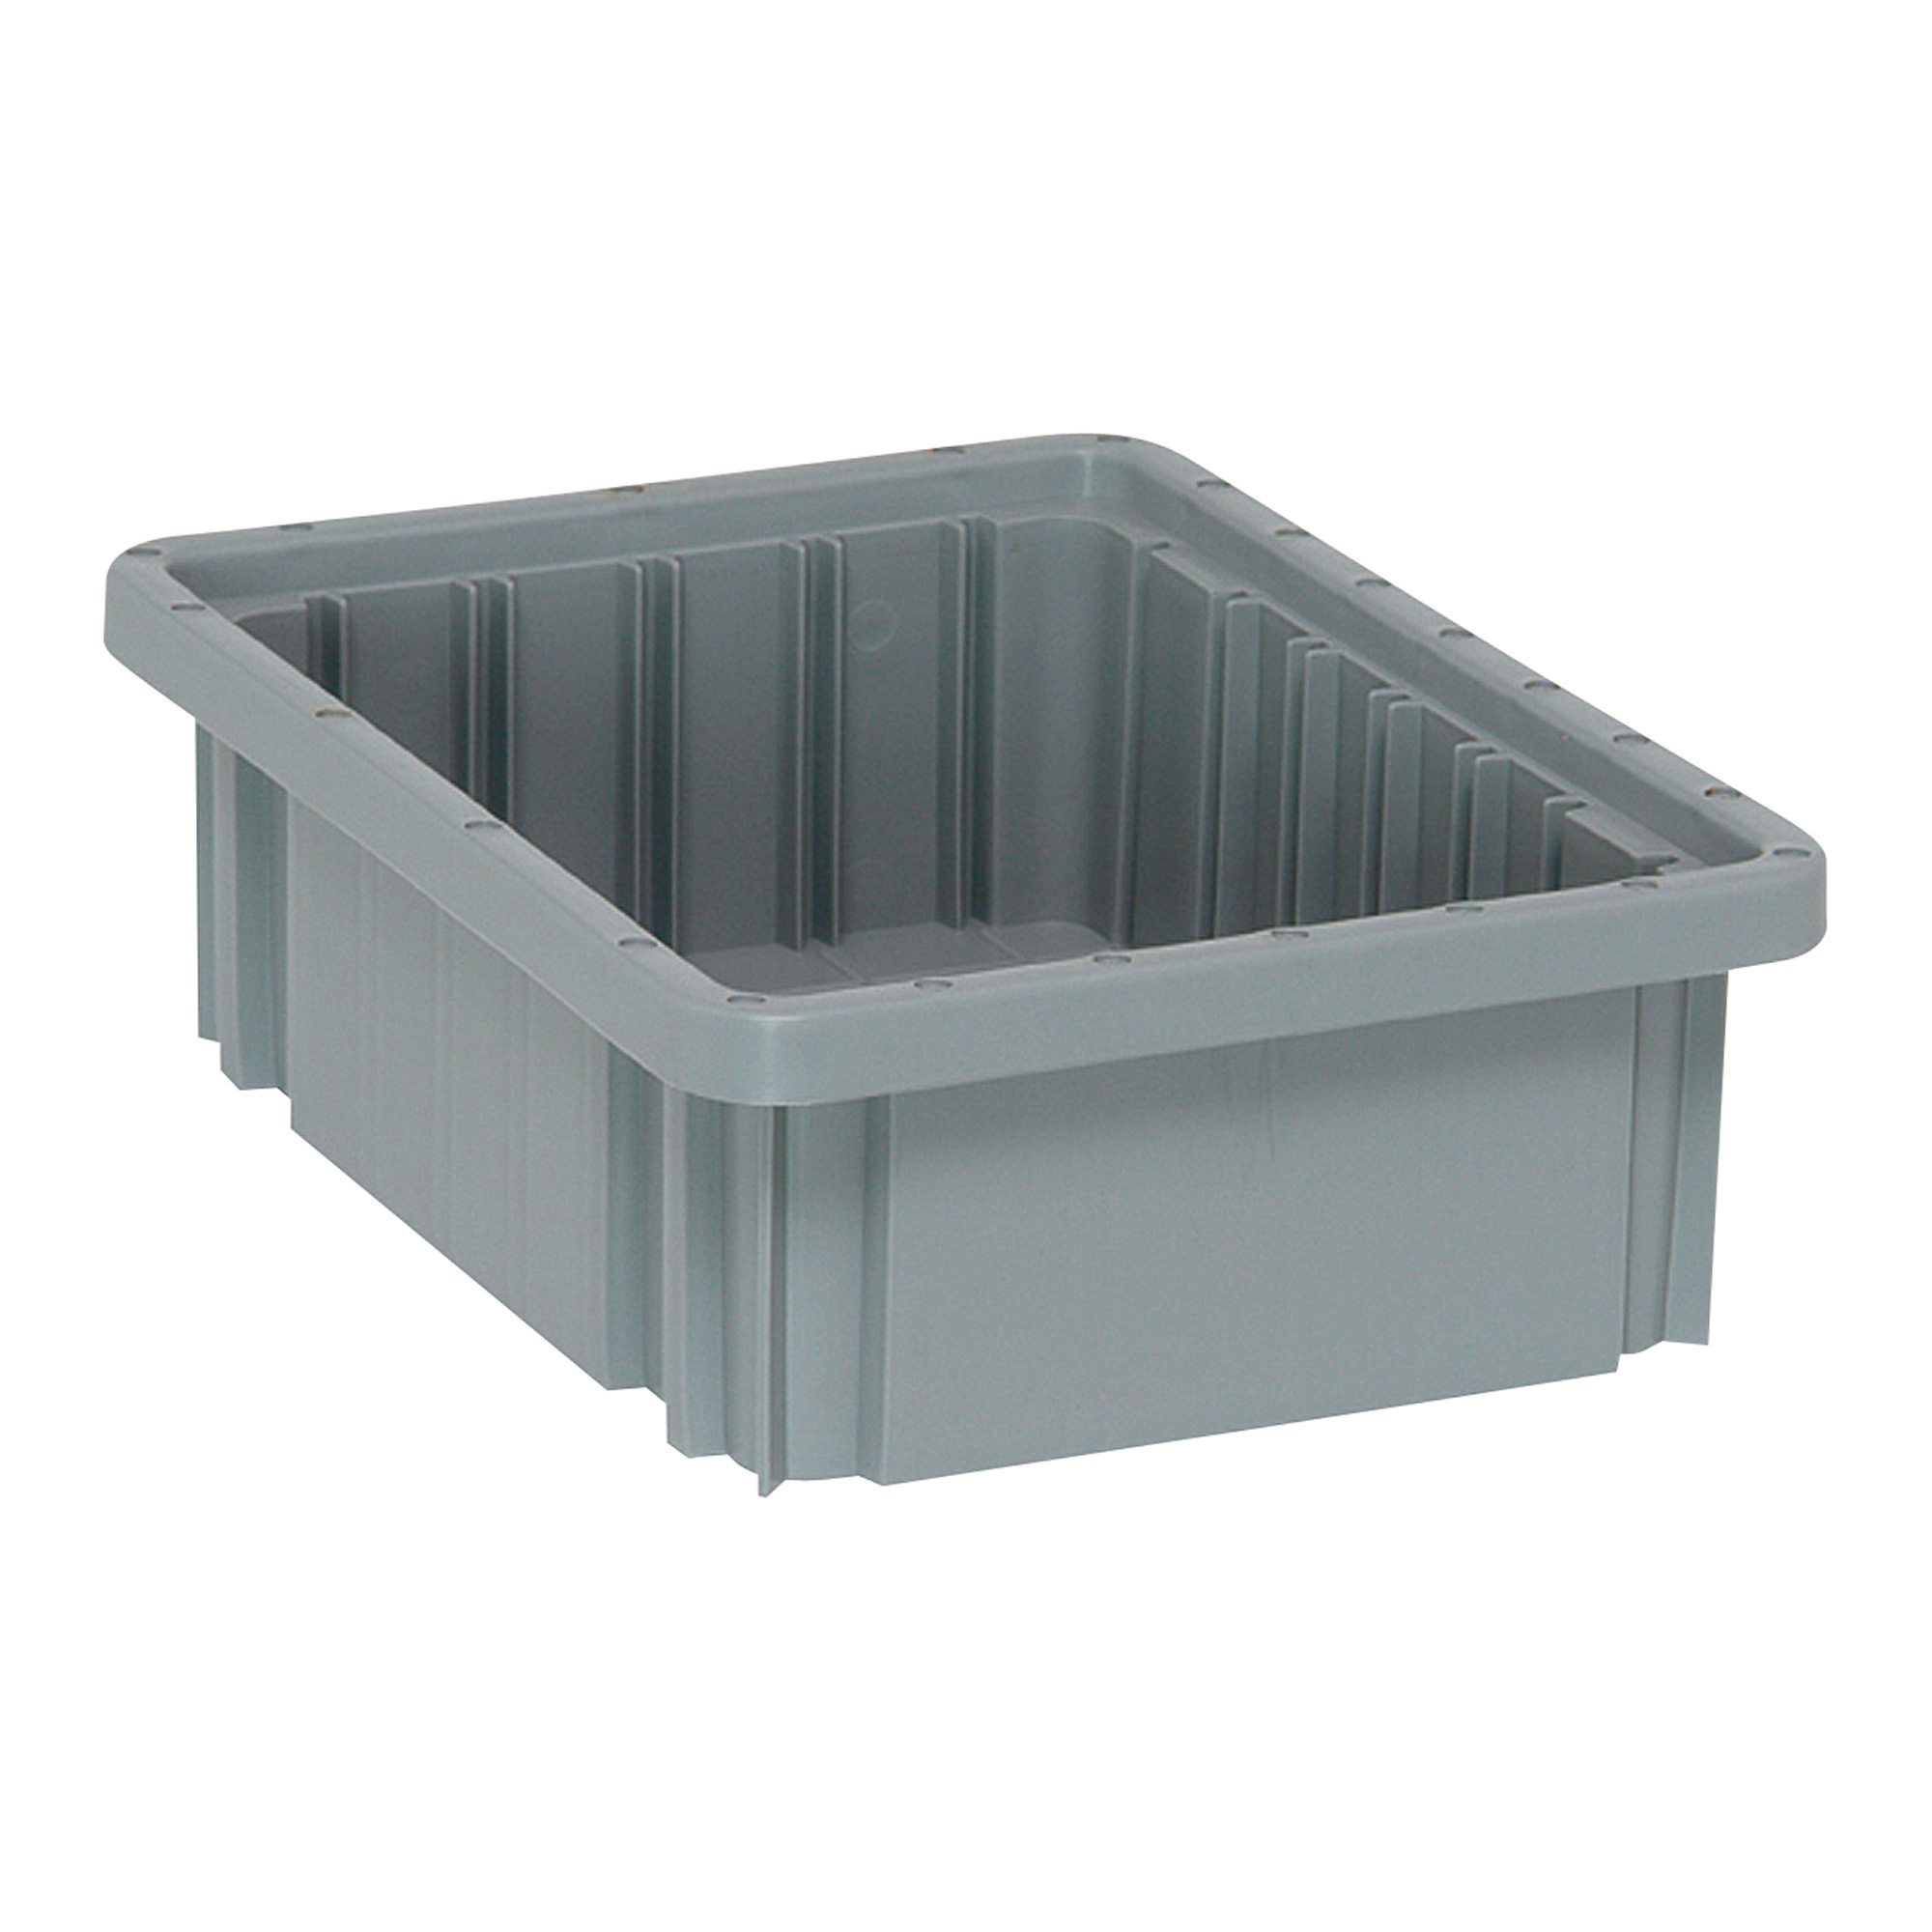 Quantum Storage Dividable Grid Container, 20-Pack, 10 7/8Inch L x 8 1/4Inch W x 3 1/2Inch H, Gray, Model DG91035GY